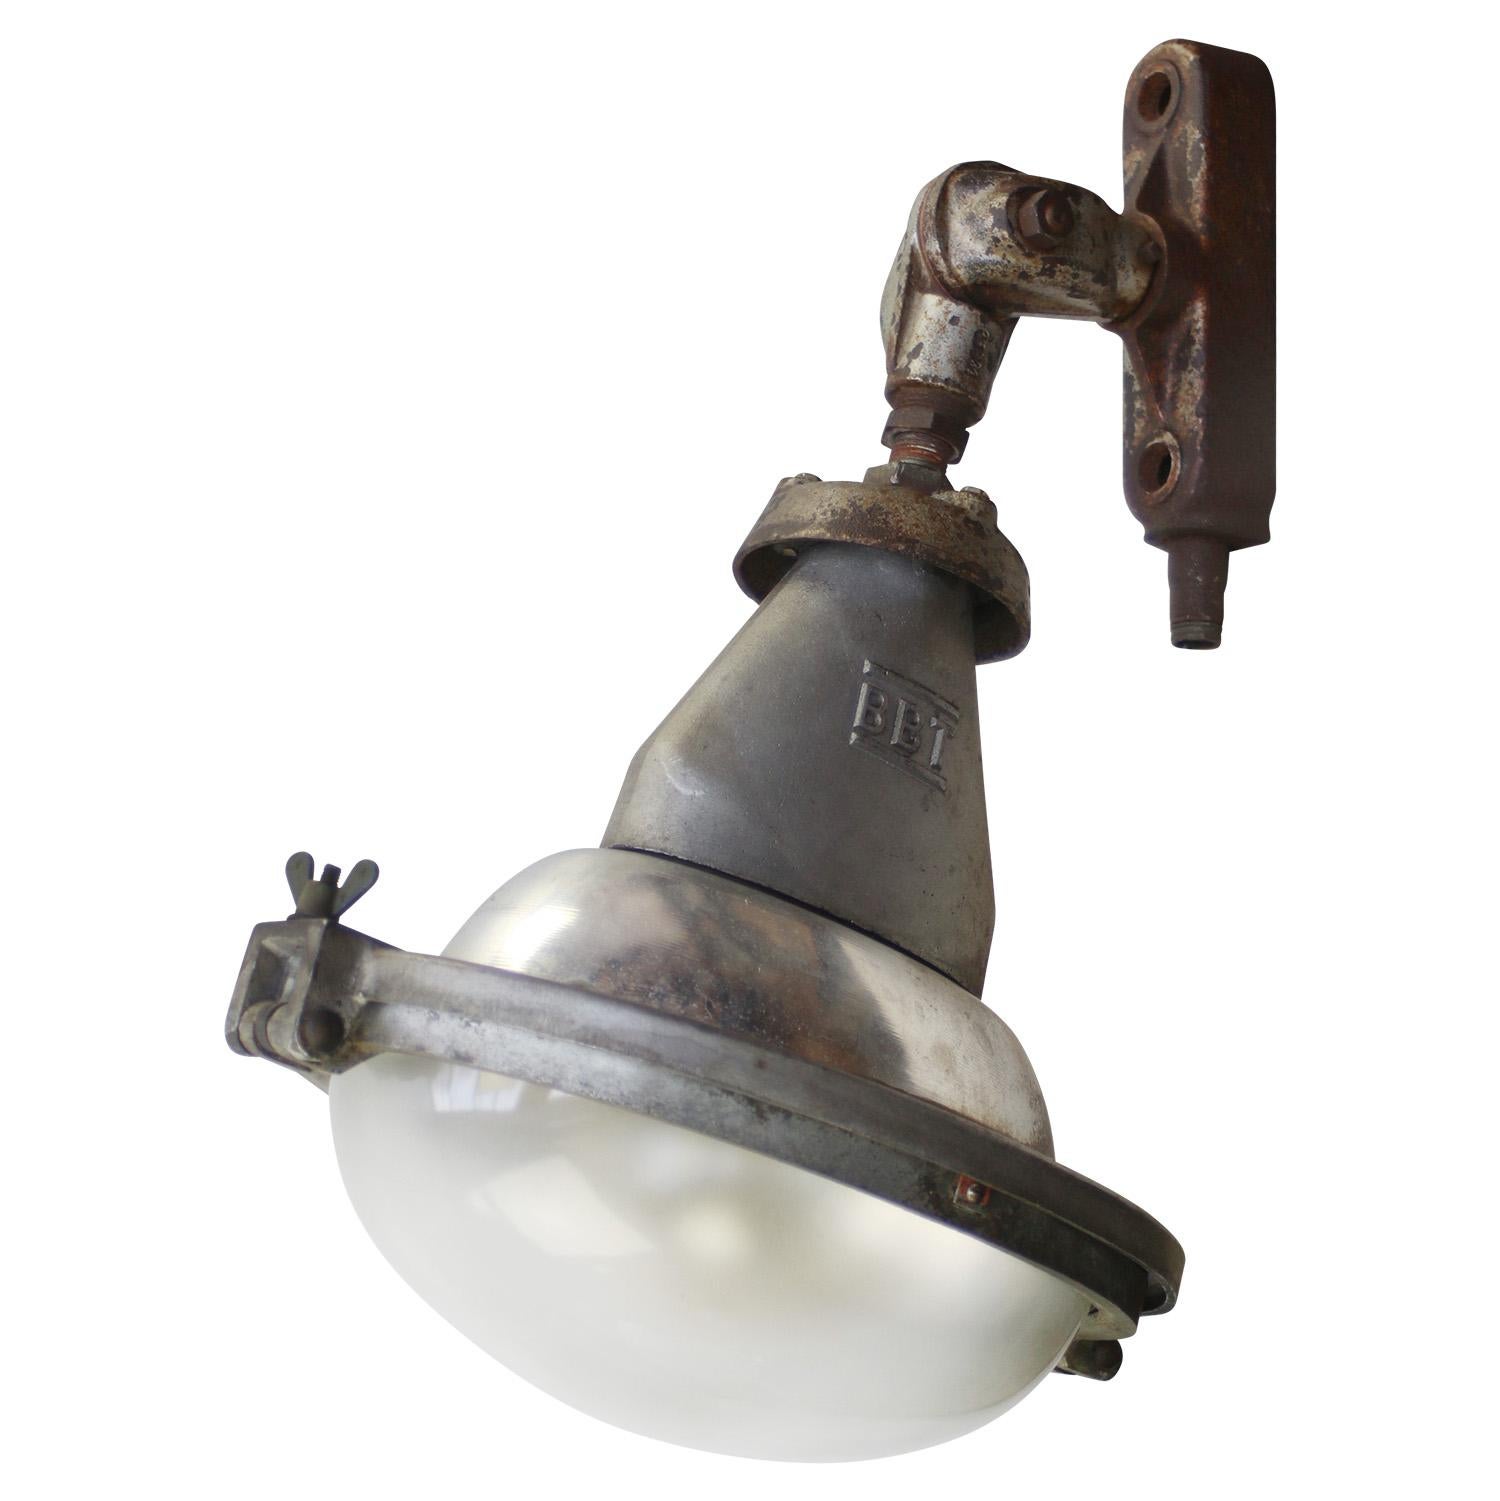 French street wall light by BBT France
Cast iron arm with round oval frosted glass

Size wall plate : 20 × 5 cm / 7.8 × 1.9 inches

Weight: 6.40 kg / 14.1 lb

Priced per individual item. All lamps have been made suitable by international standards